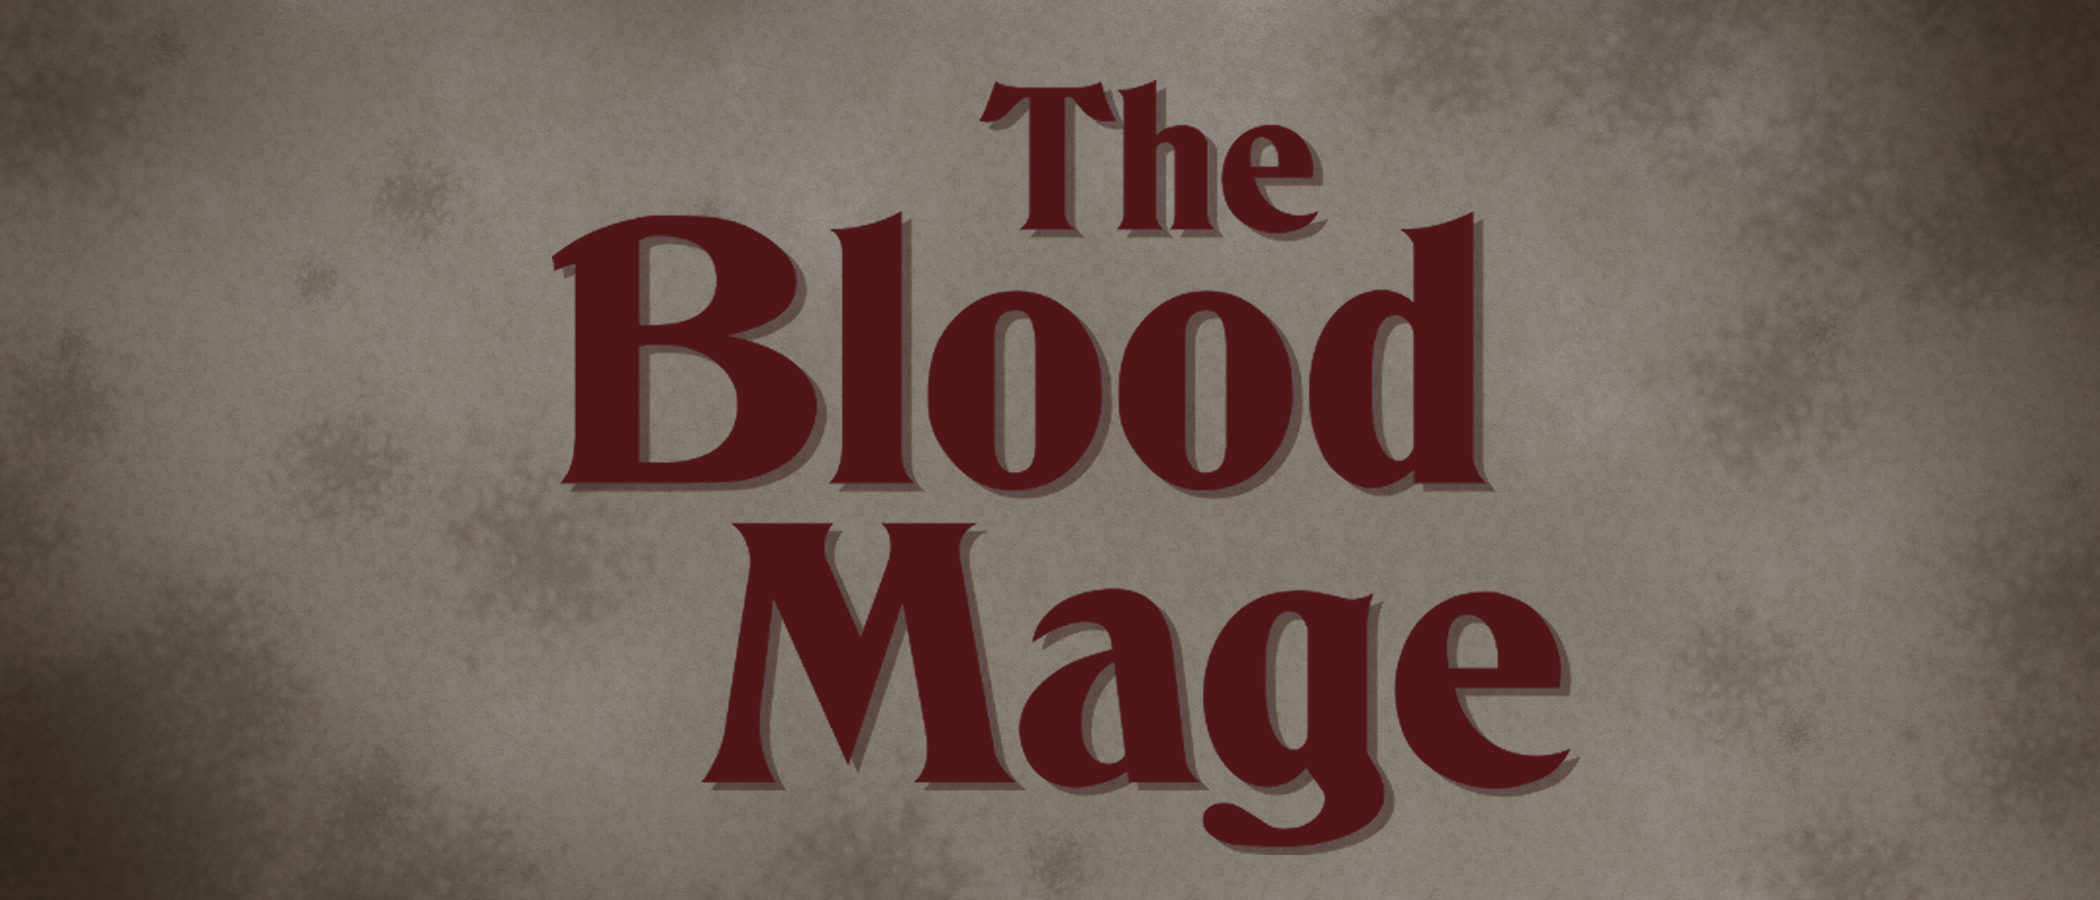 The Blood Mage